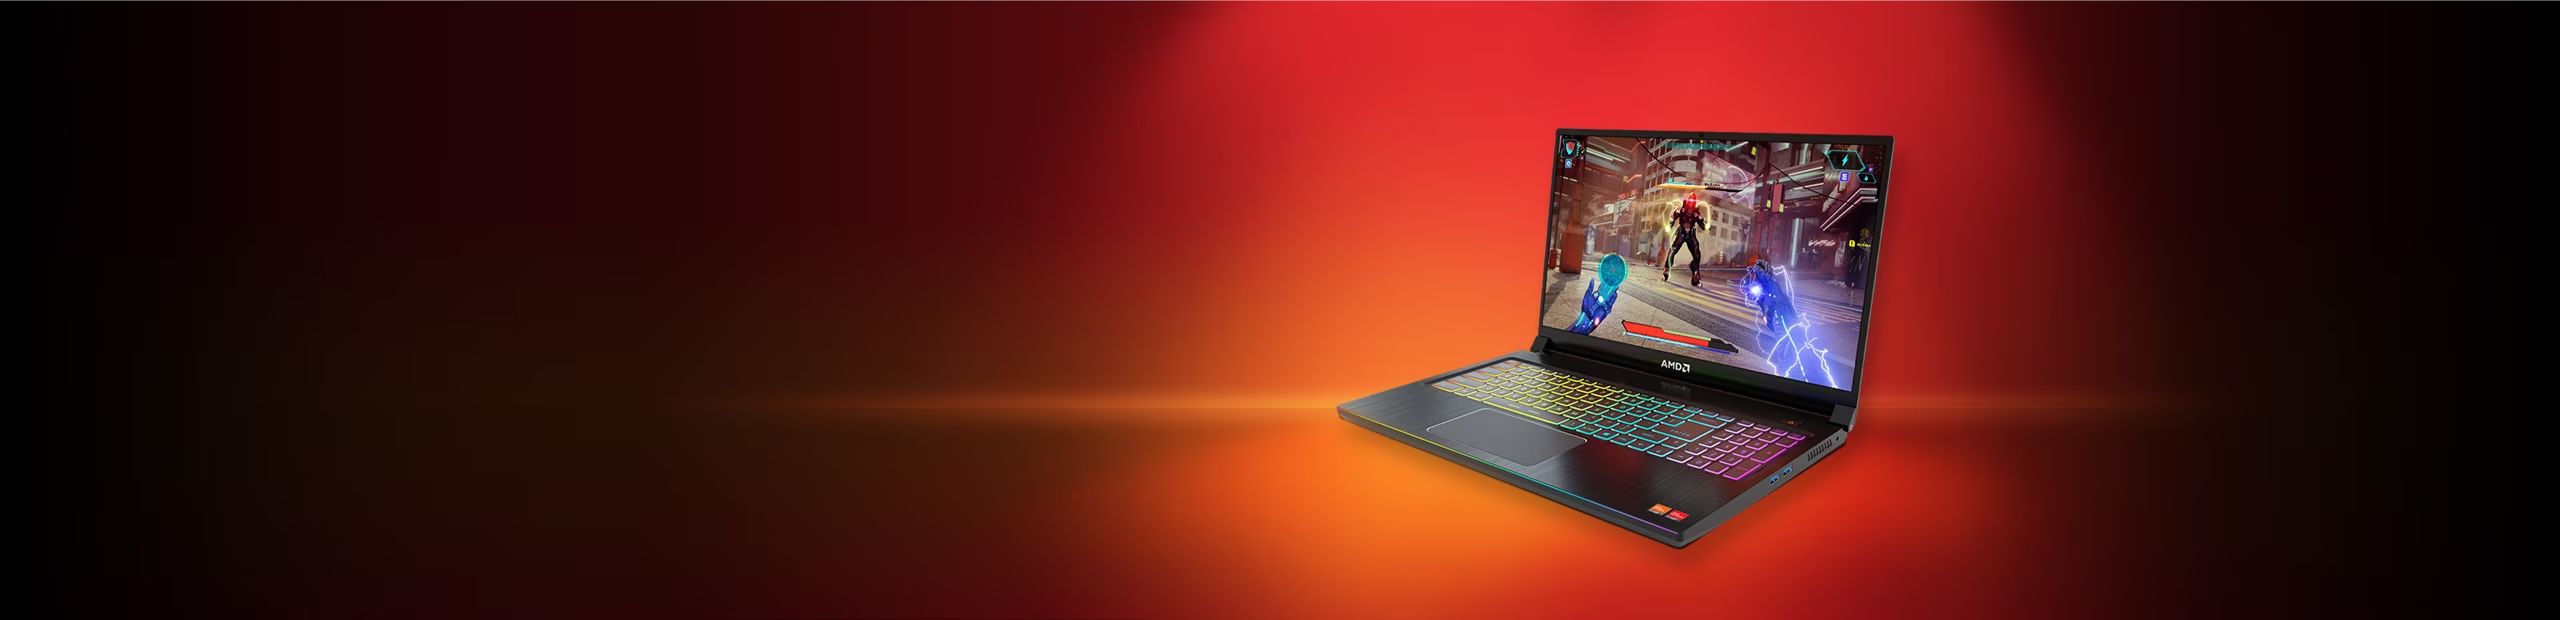 What Is The Standard Processor Speed For Gaming Laptop